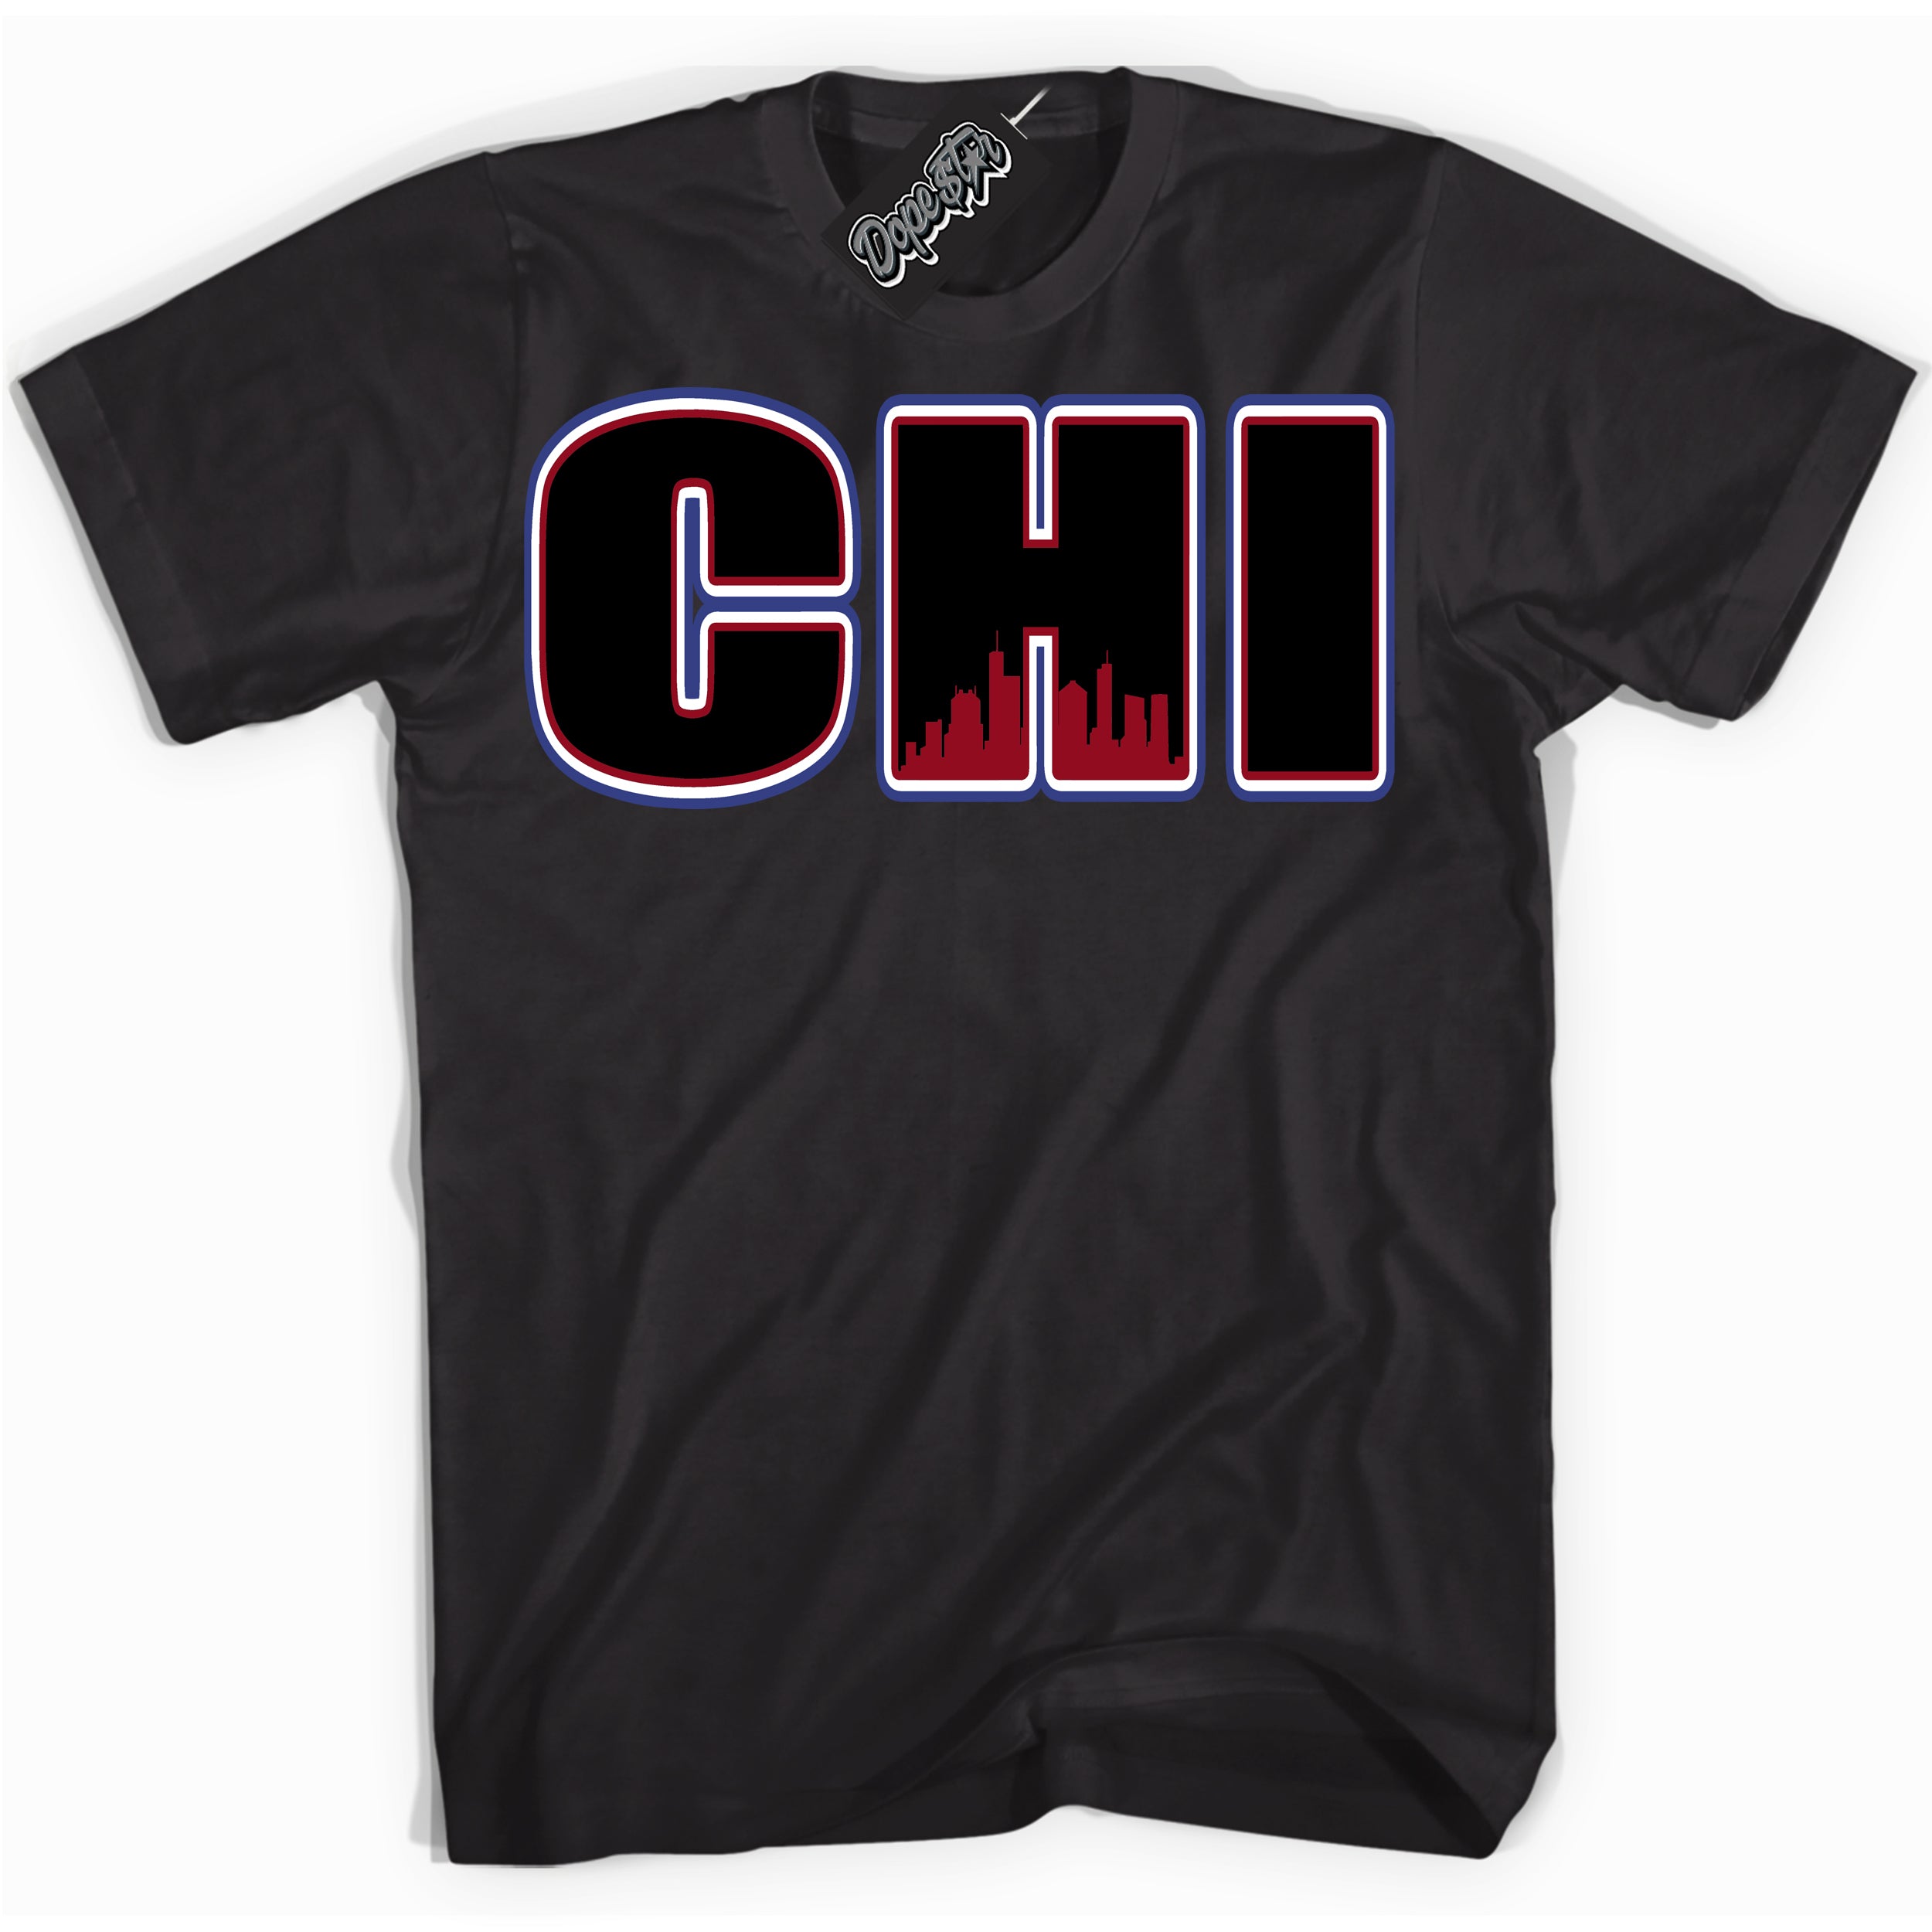 Cool Black Shirt with “ Chicago ” design that perfectly matches Playoffs 8s Sneakers.